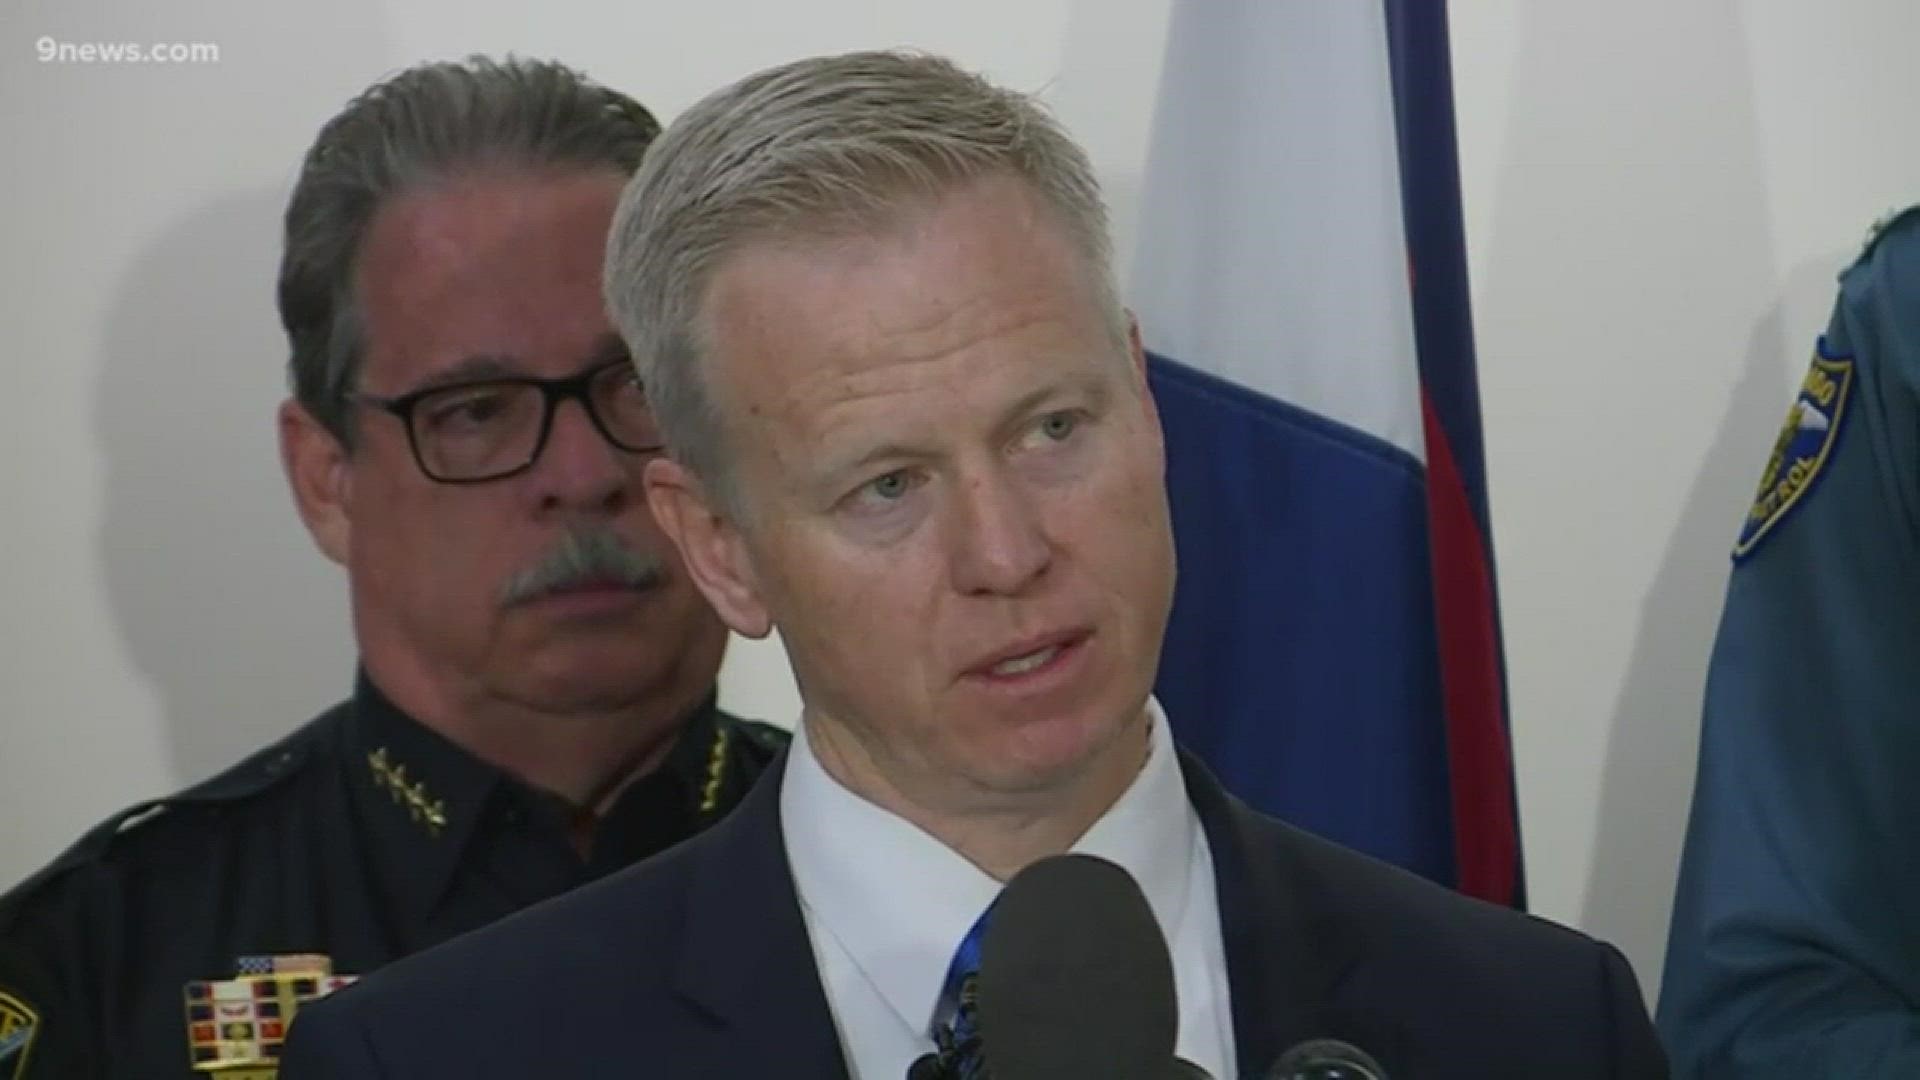 District Attorney George Brauchler speaks at a press conference in Highlands Ranch, Colorado, on Wednesday, May 8, 2019.